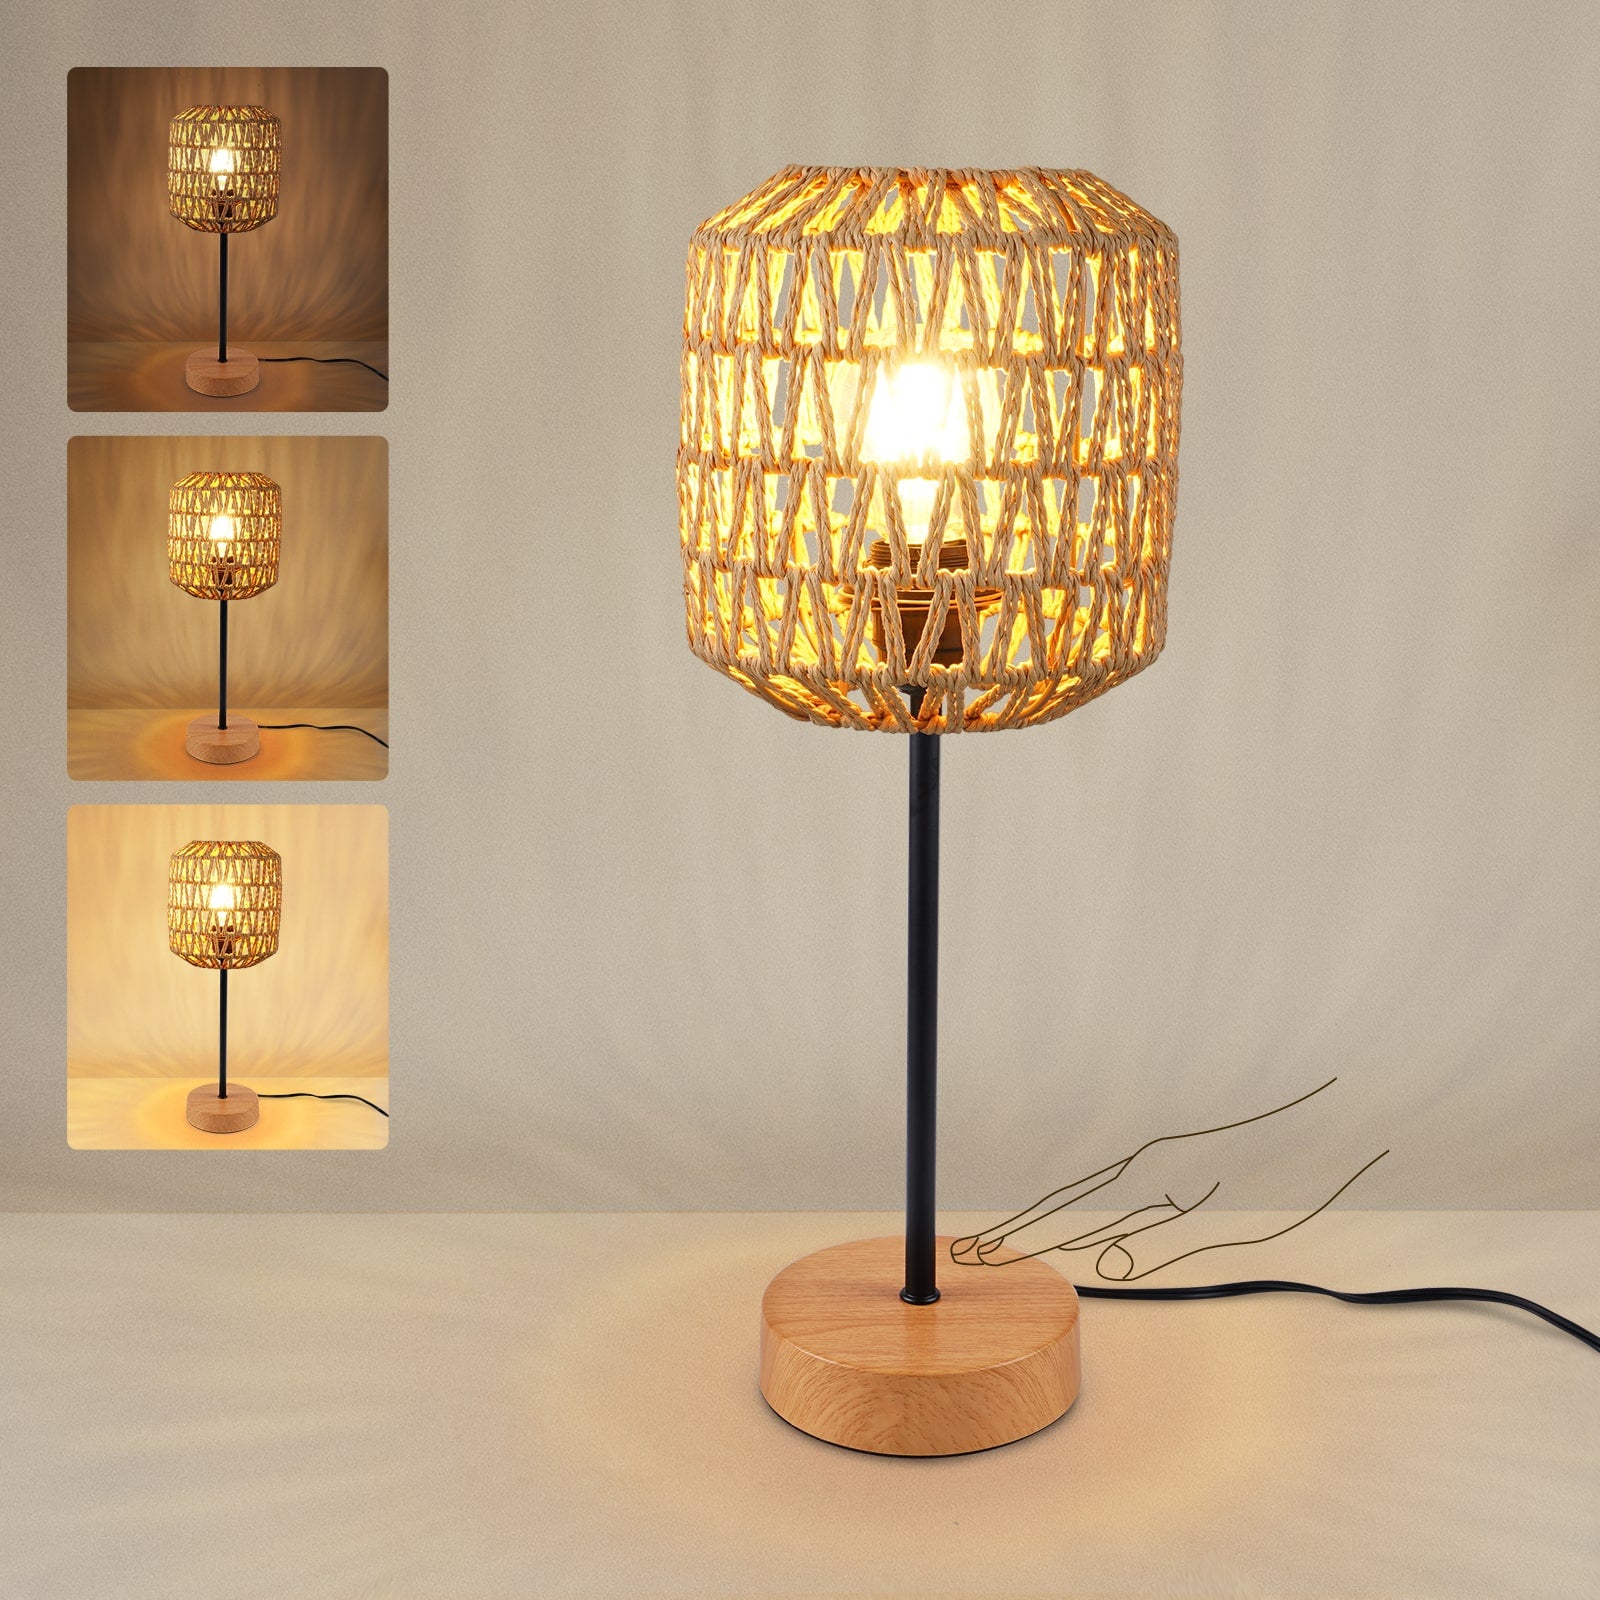 N02 Hand-Woven Rattan Table Lamp for Study Room